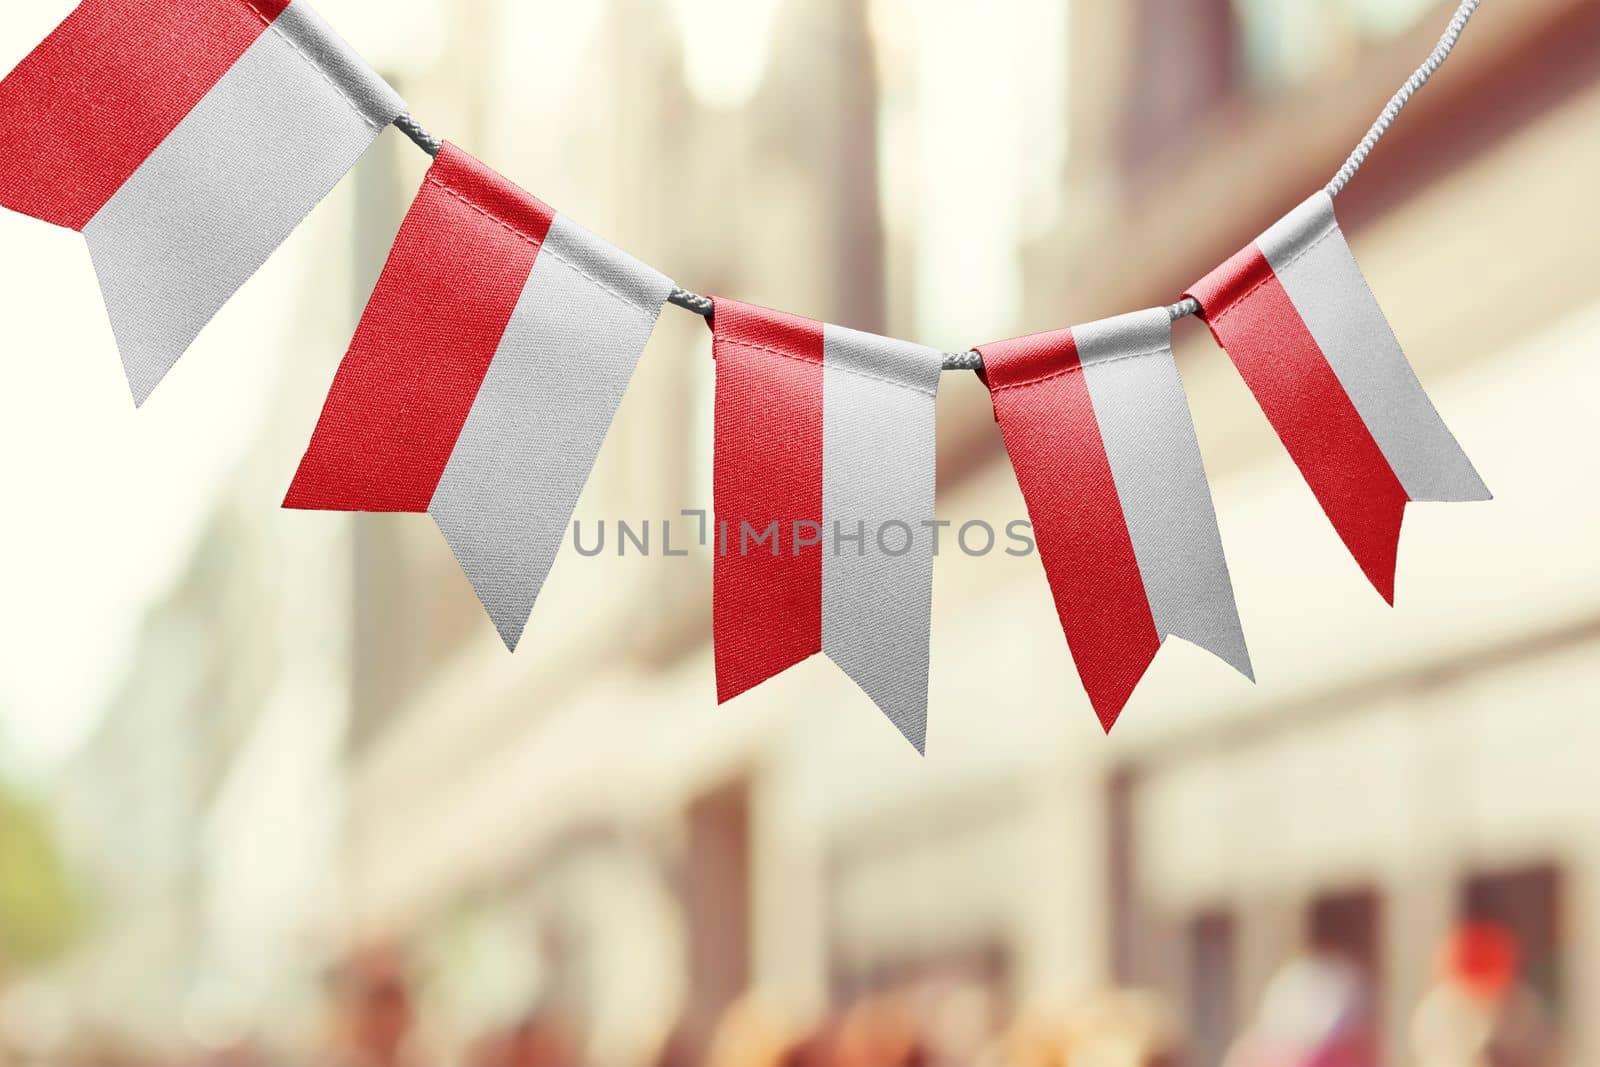 A garland of Poland national flags on an abstract blurred background.